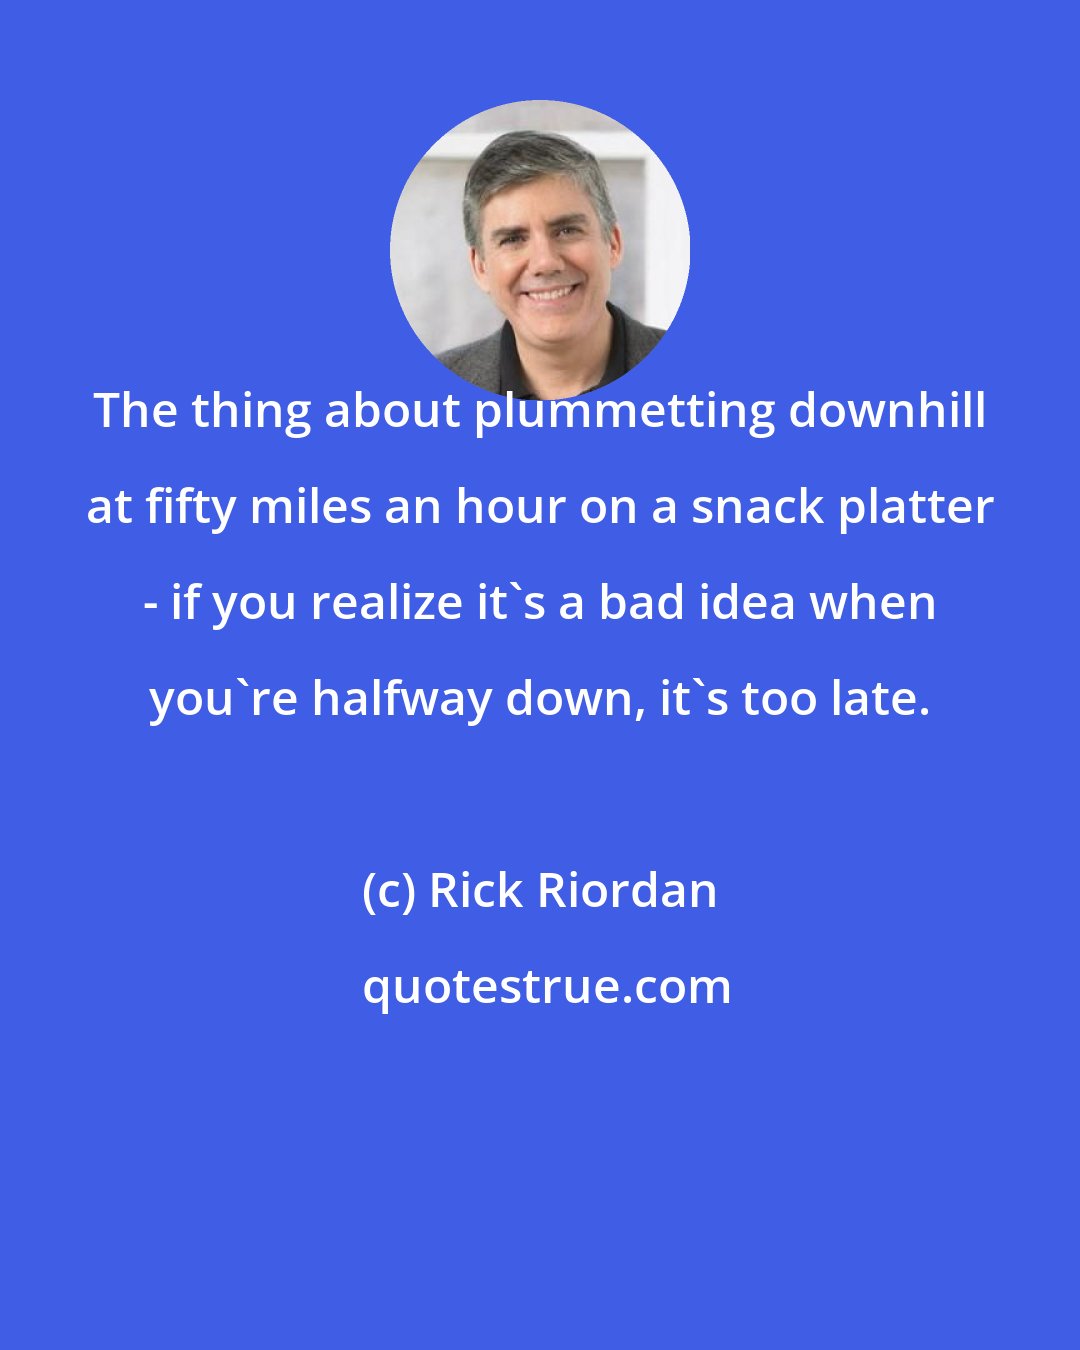 Rick Riordan: The thing about plummetting downhill at fifty miles an hour on a snack platter - if you realize it's a bad idea when you're halfway down, it's too late.